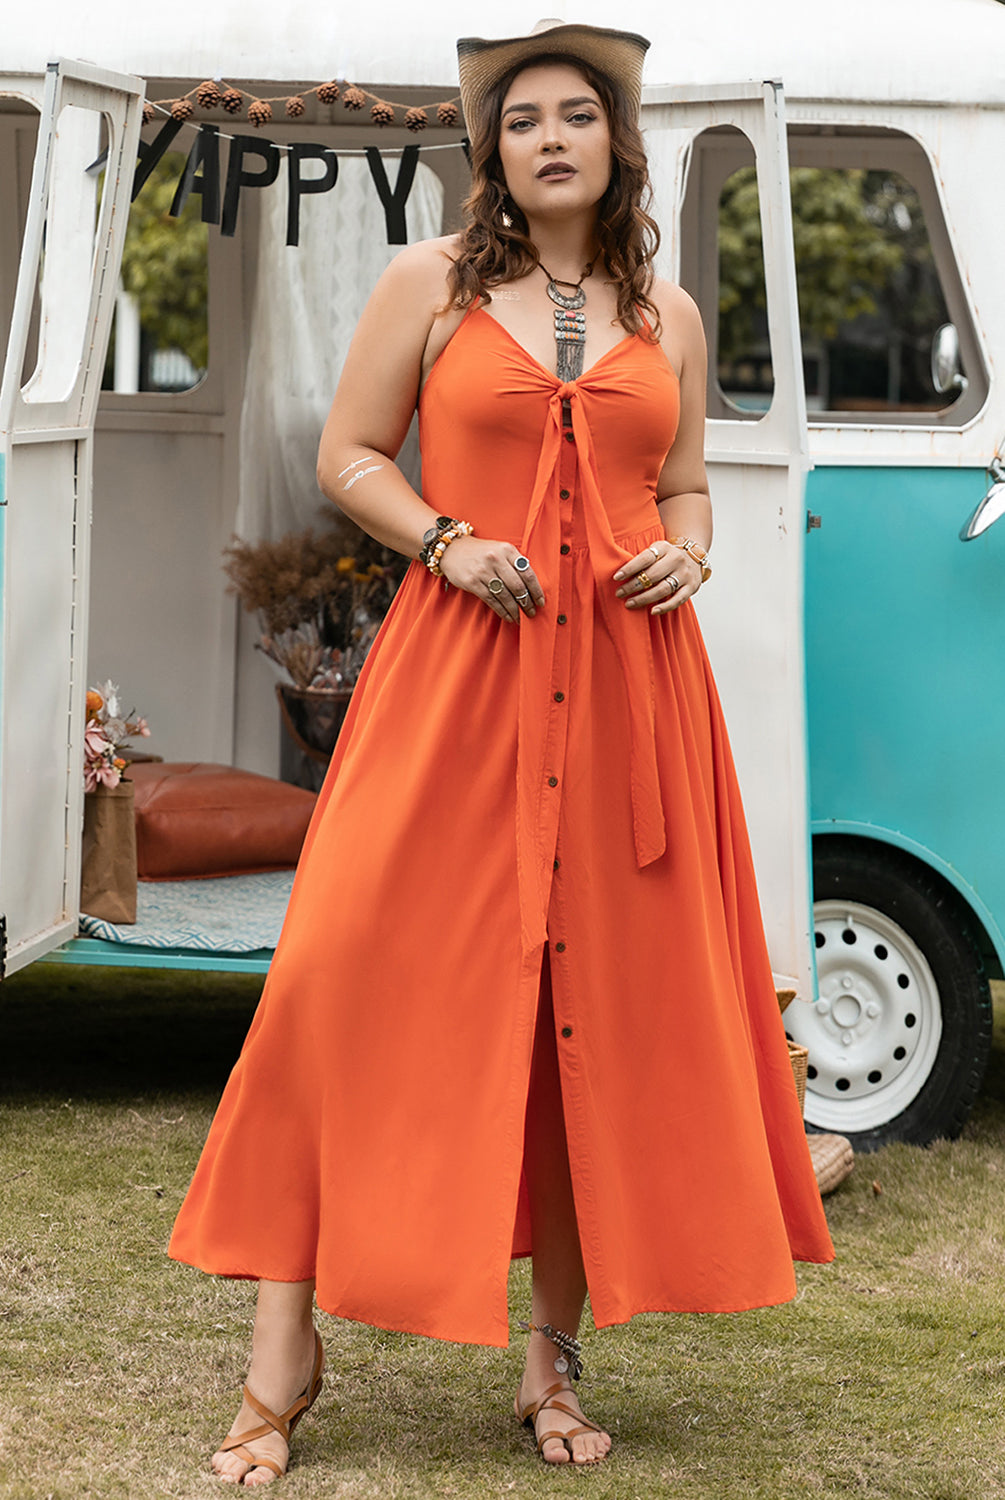 Woman wearing a vibrant orange plus size halter neck midi dress, standing in front of a decorated camper van.